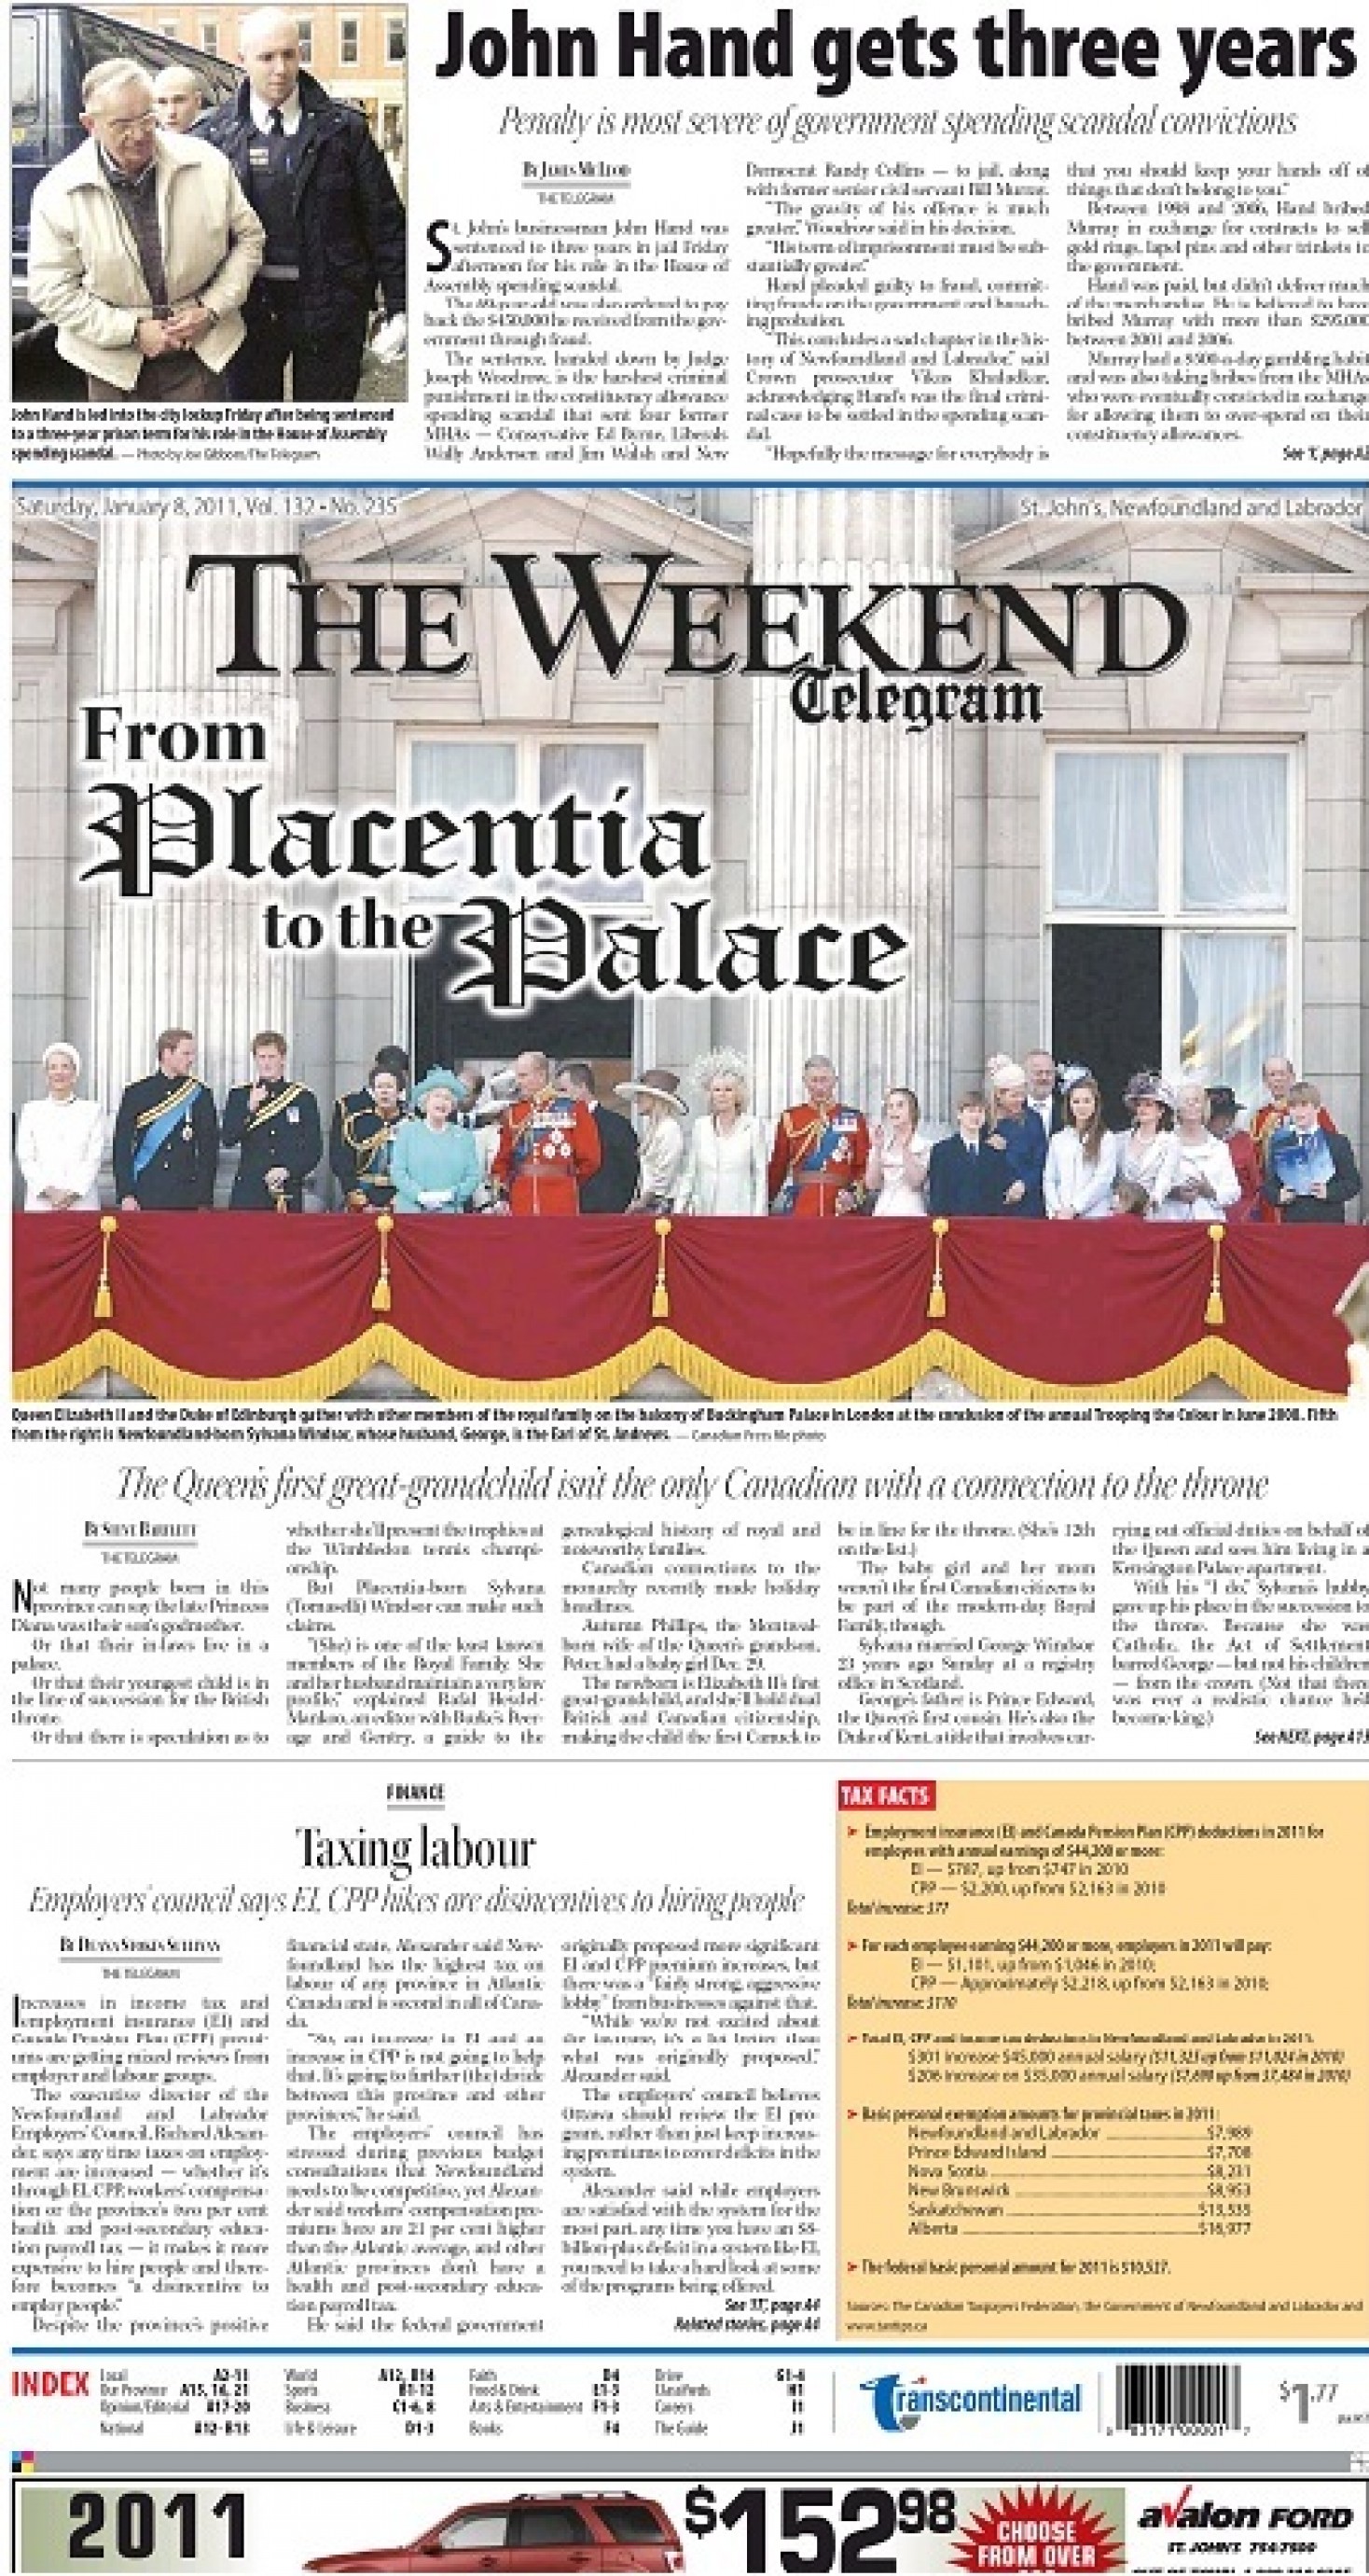 NLEC makes cover of Telegram on Tax on Labour